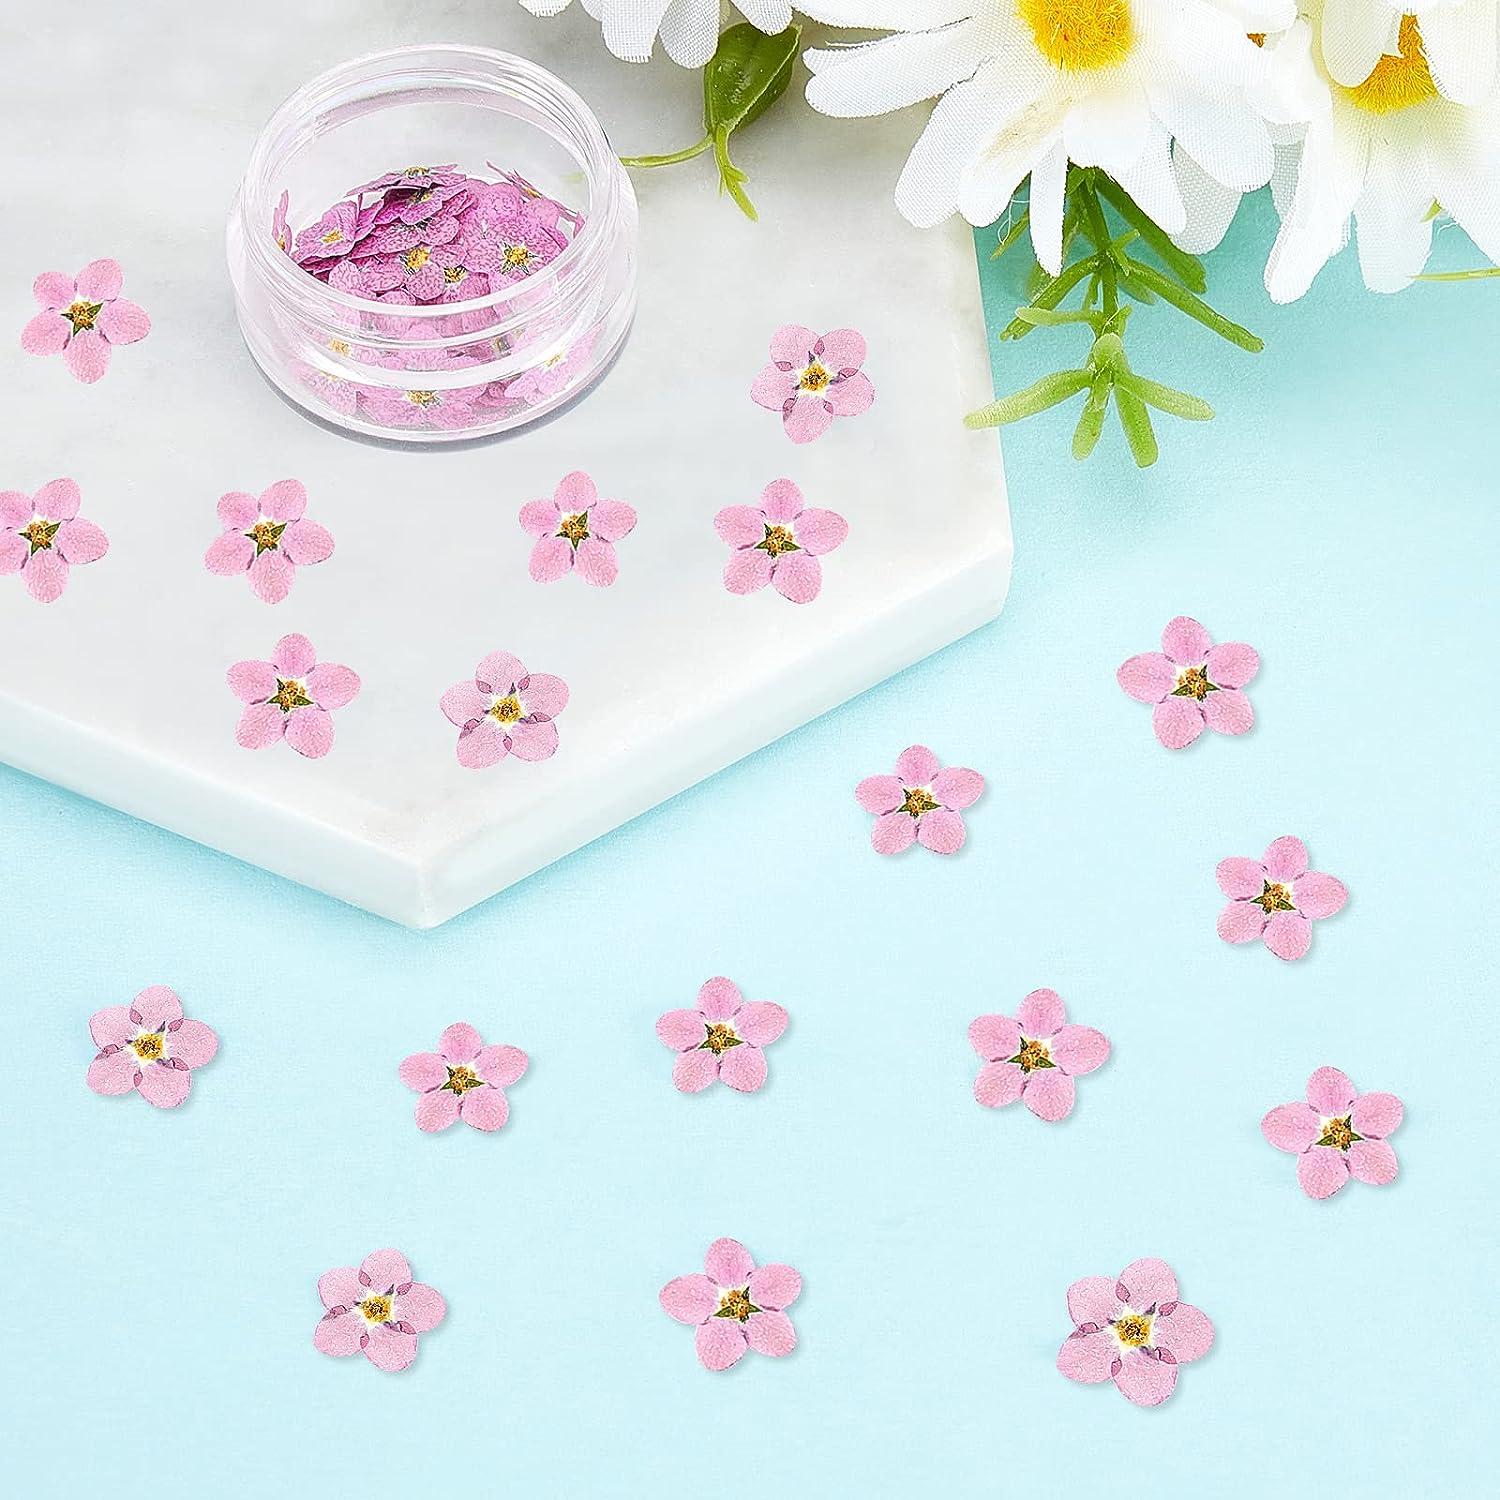 100pcs,Natural Pressed forget-me-not flowers with Stem,Real Dried Flower  for DIY Wedding invitation Craft Bookmark Gift Cards